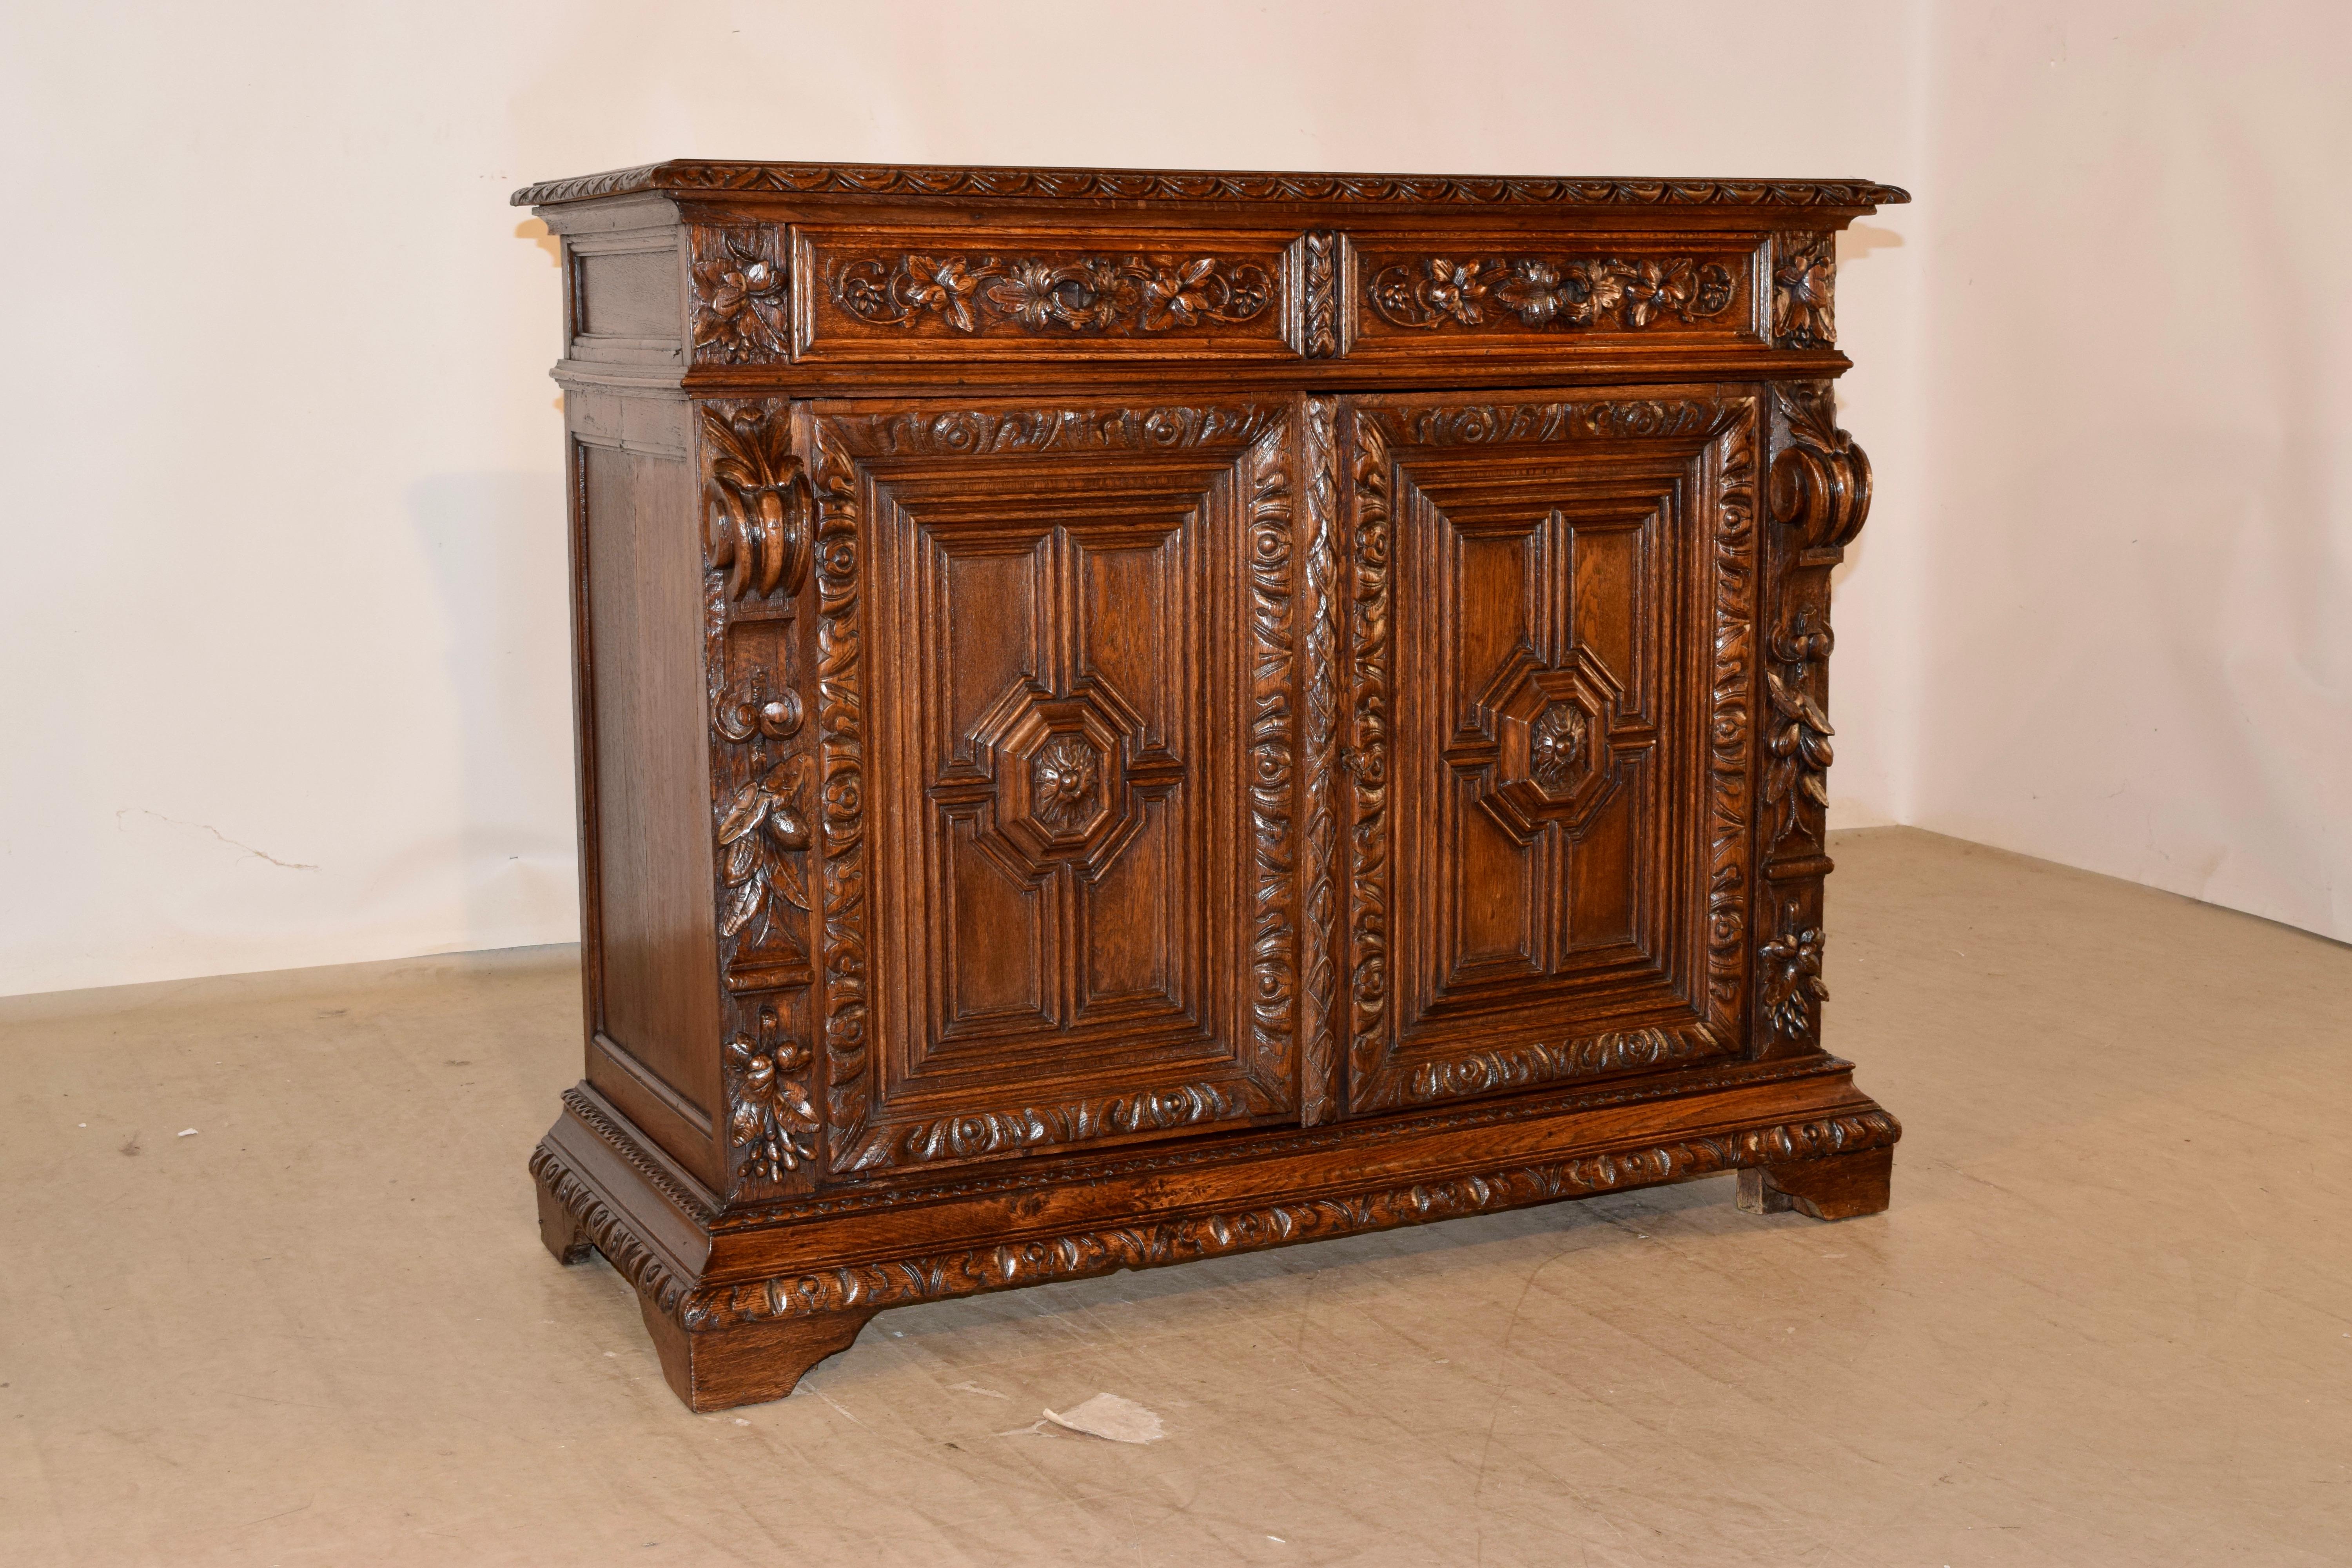 19th century oak buffet from France with a beautifully molded and hand carved lunette decorated edge around the top, following down to lovely and simple hand paneled sides and two drawers over two doors in the front, which open to reveal shelving.